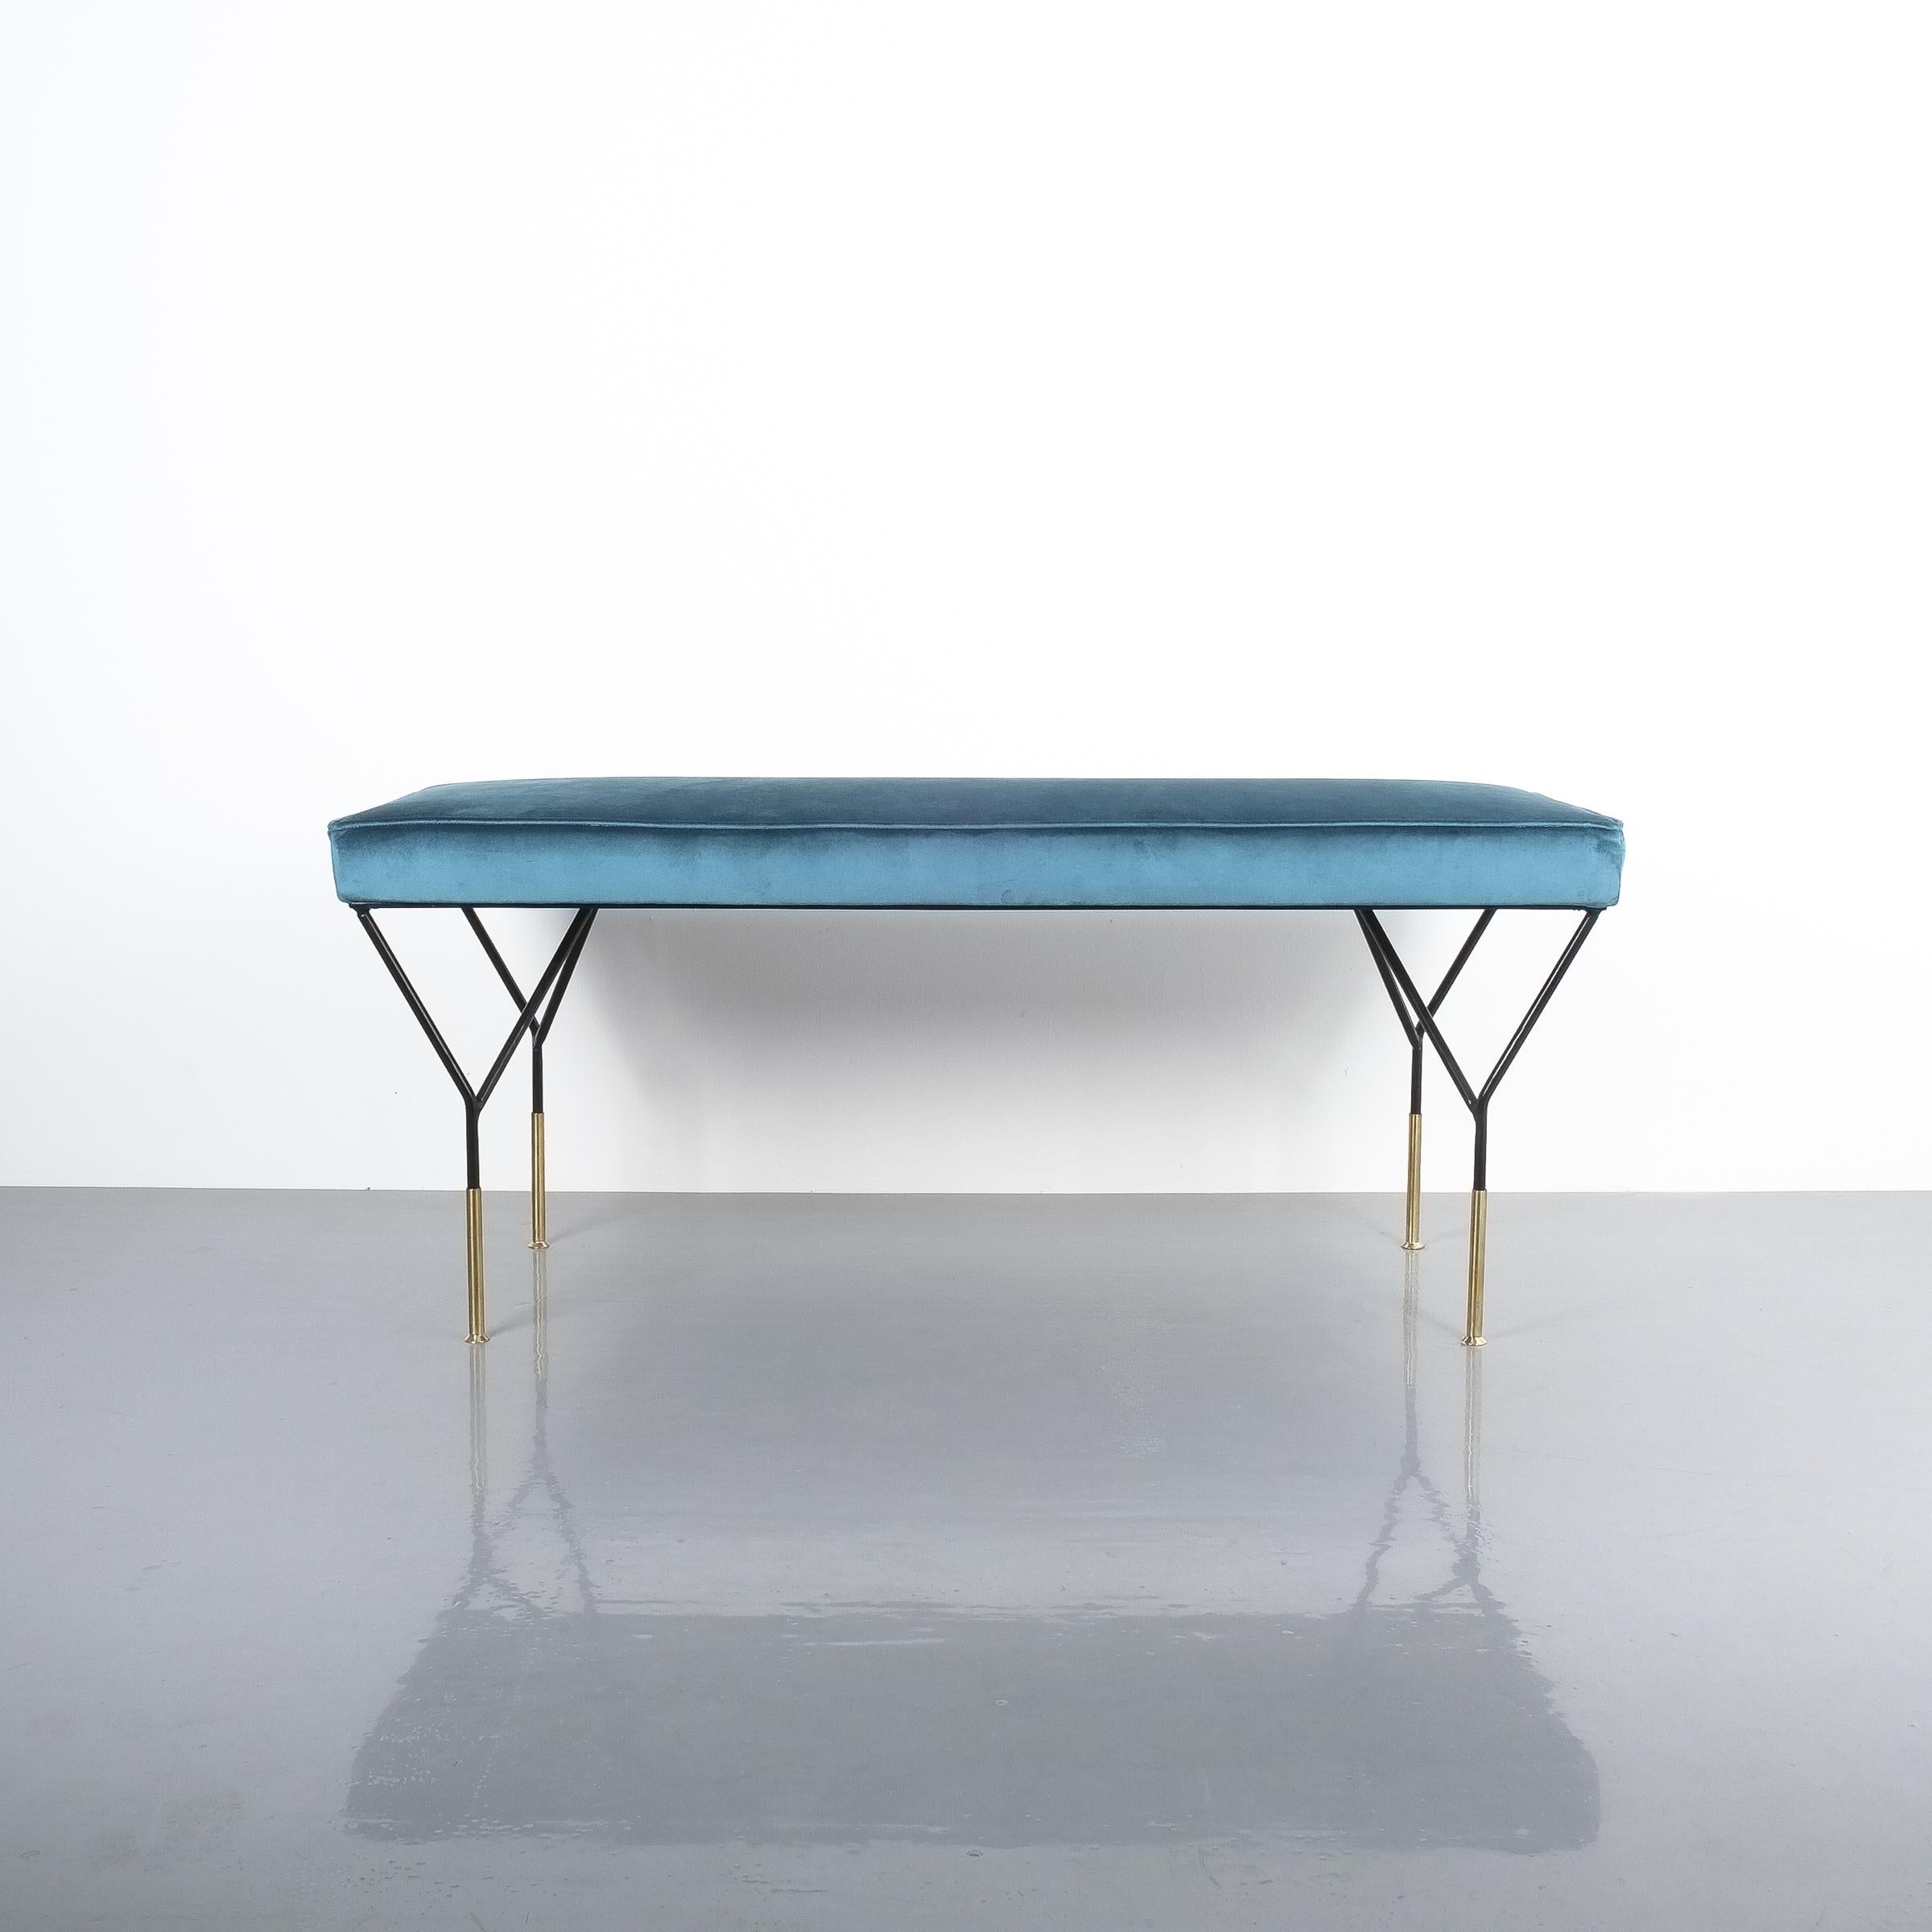 Italian velvet brass bench, Italy, 1950. Elegant and slender Italian in fully refurbished, excellent condition with a newly upholstered seat in petrol color (blue-green). It measures 49